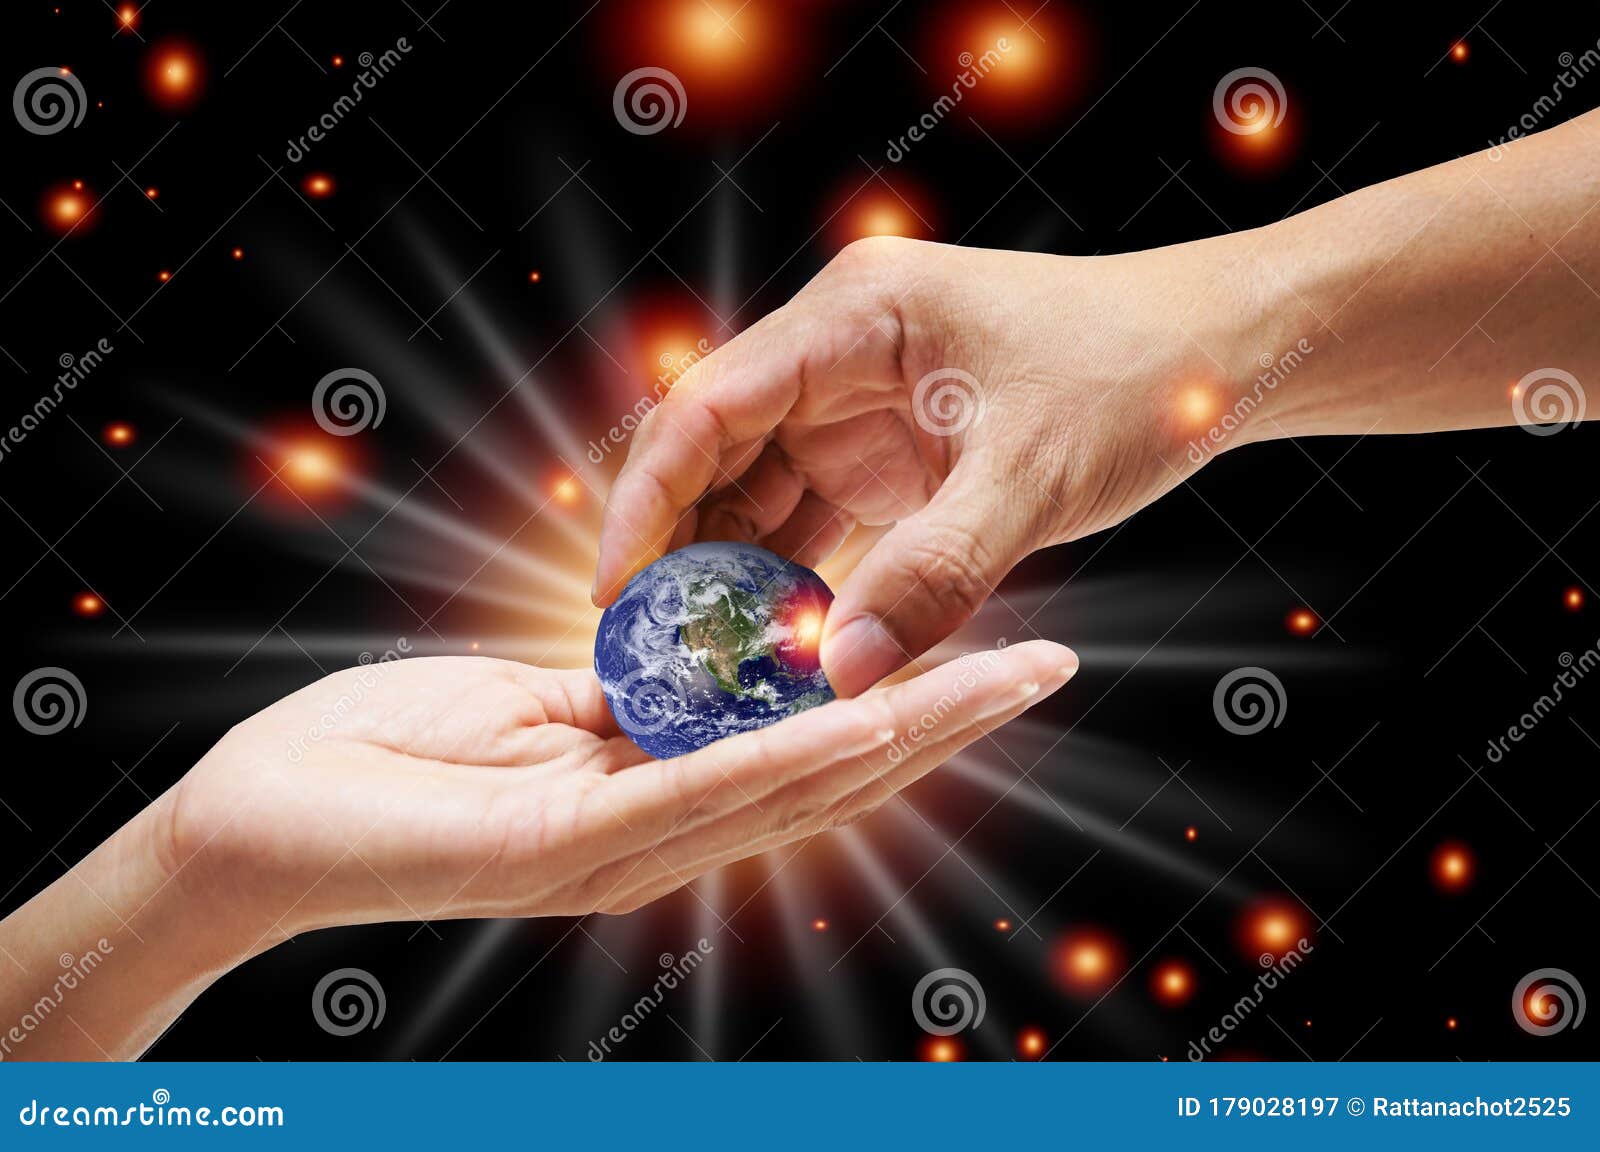 a close up image of a human hand holding a light-emitting planet ecology  and changing the world,s of this image